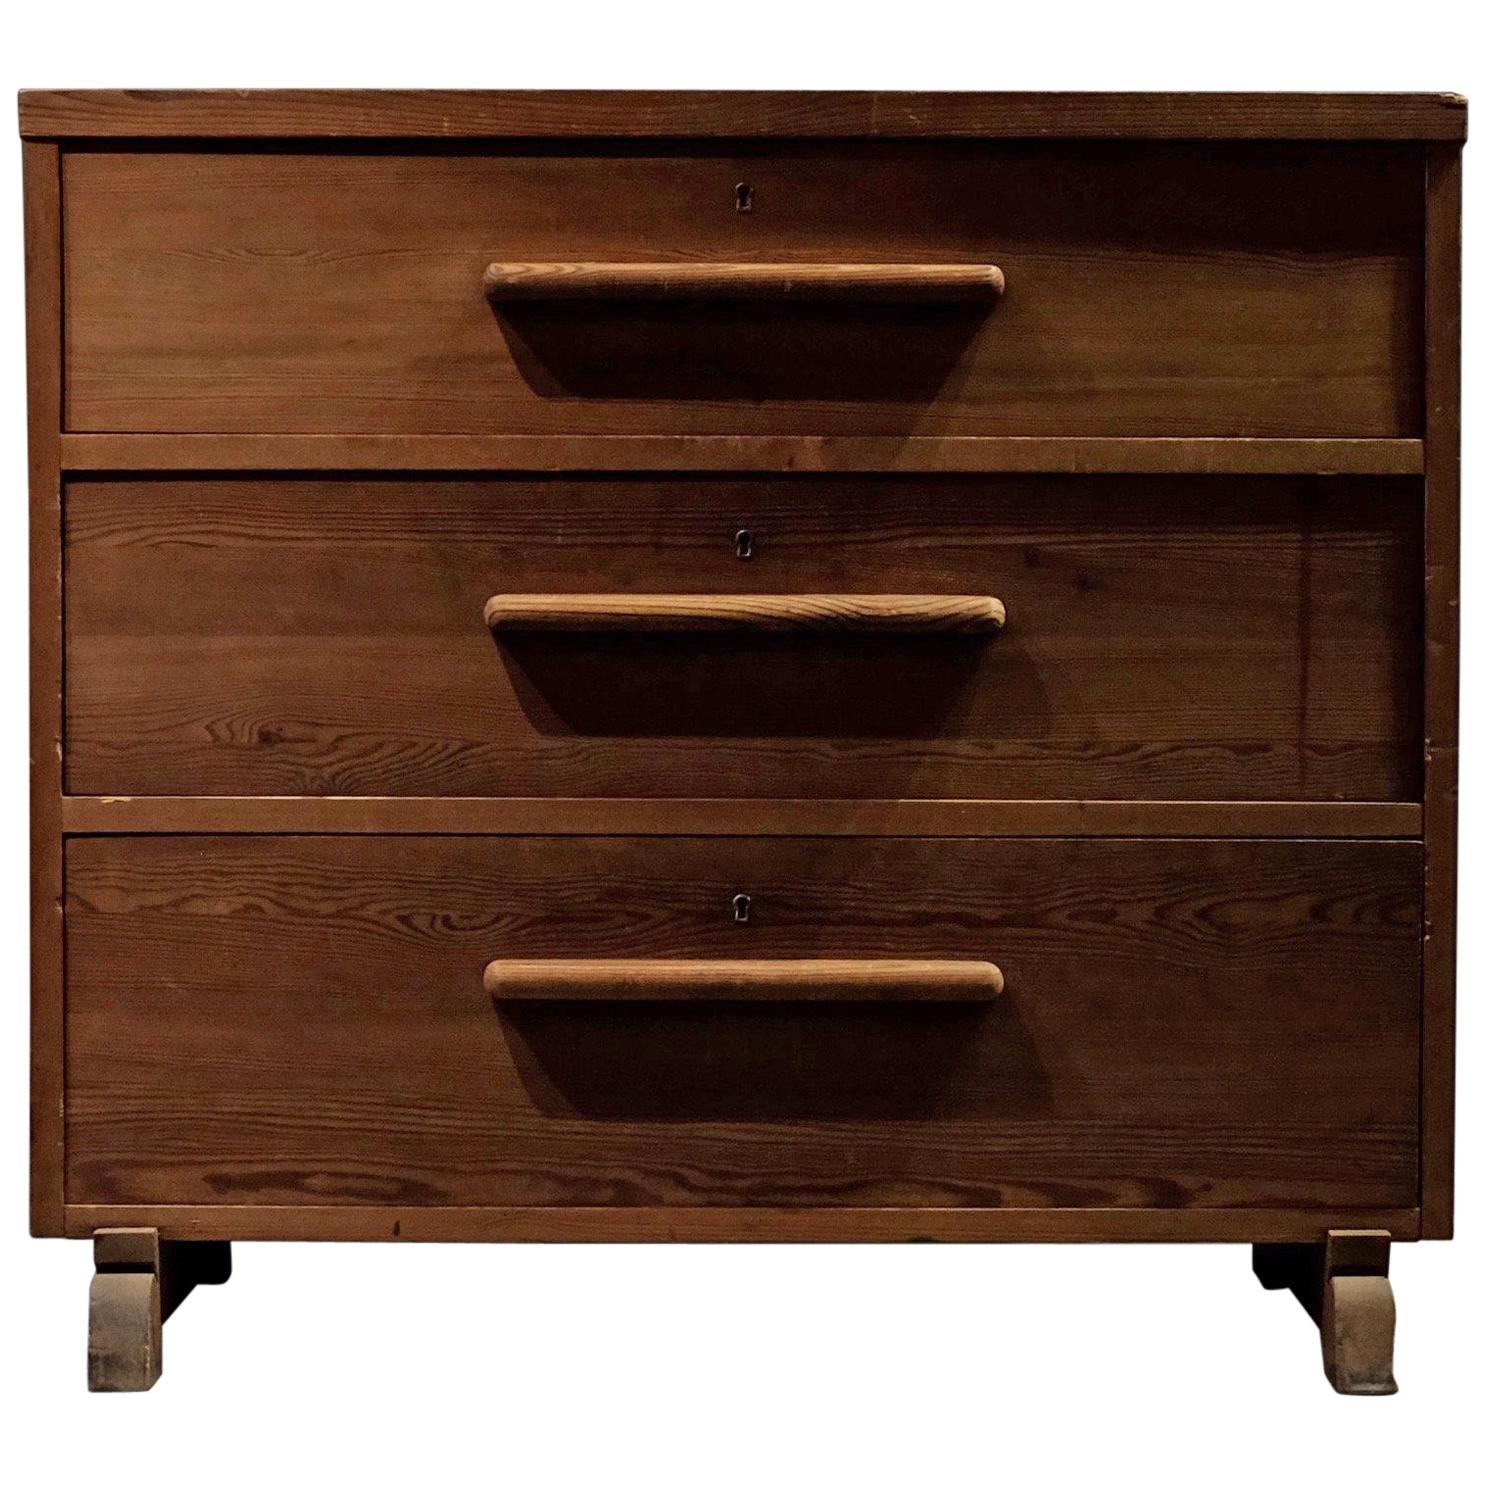 Rare Axel-Einar Hjorth Chest of Drawers Model "Sport", 1930s